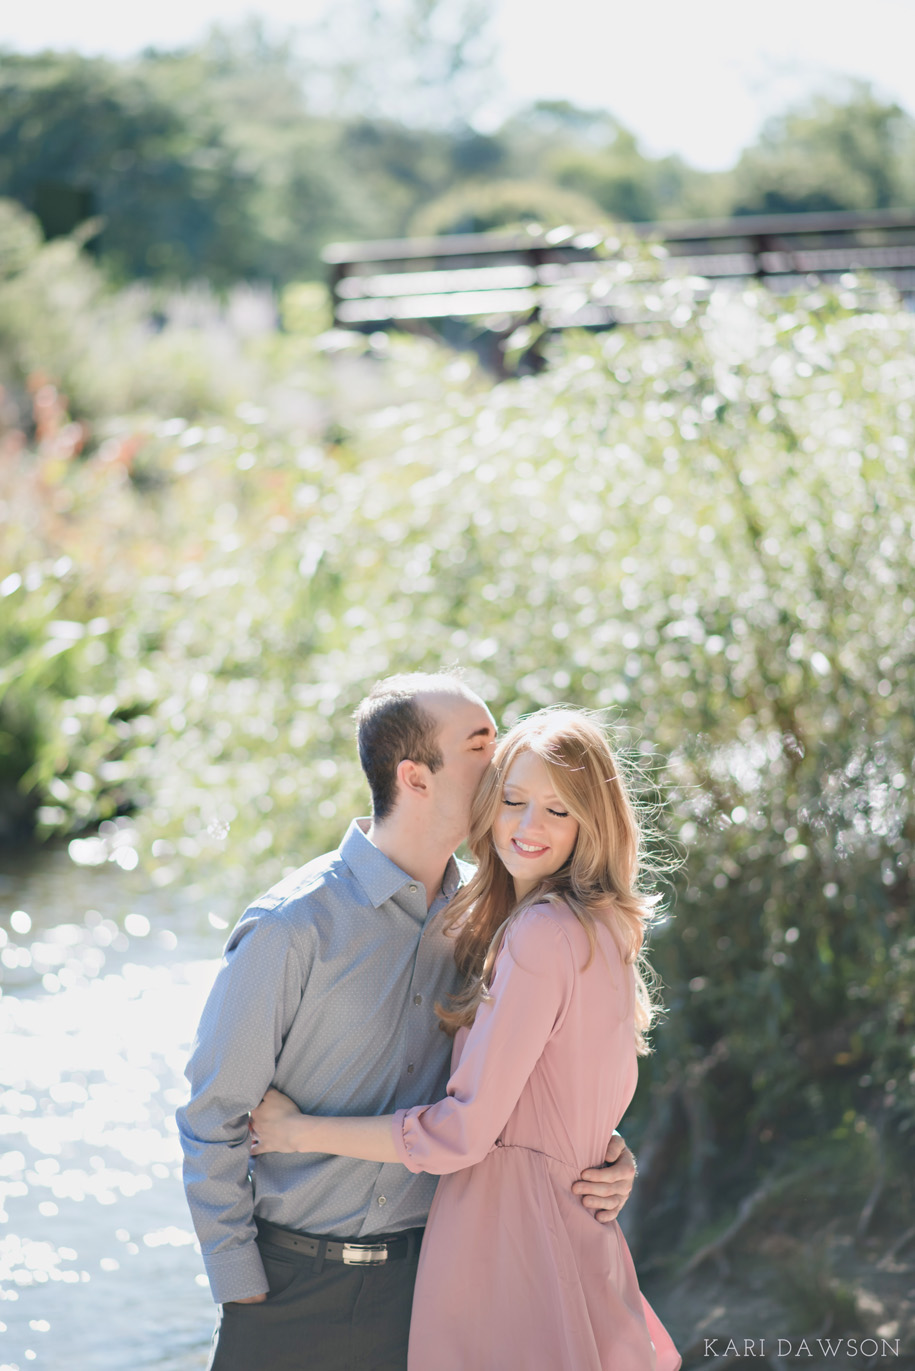 Romantic engagement session pose and great pink outfit inspiration. Rustic outdoor engagement photographer, Kari Dawson in Rochester, Michigan